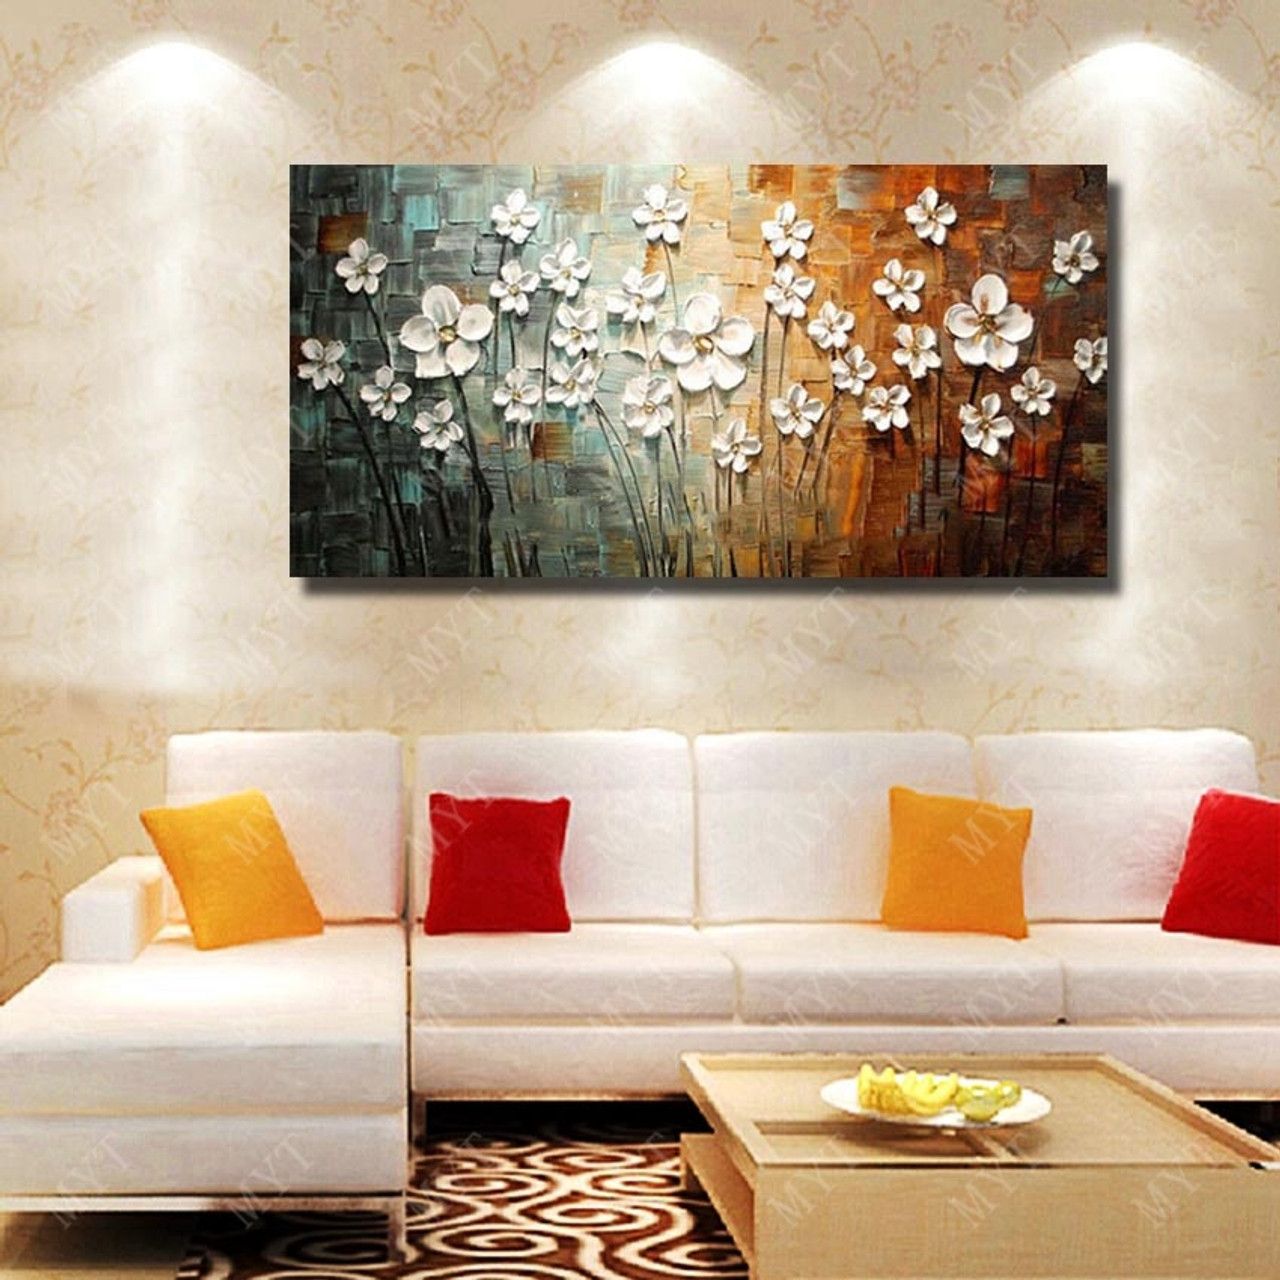 Wall Painting Art Design Images : Do you want to do a makeover for your